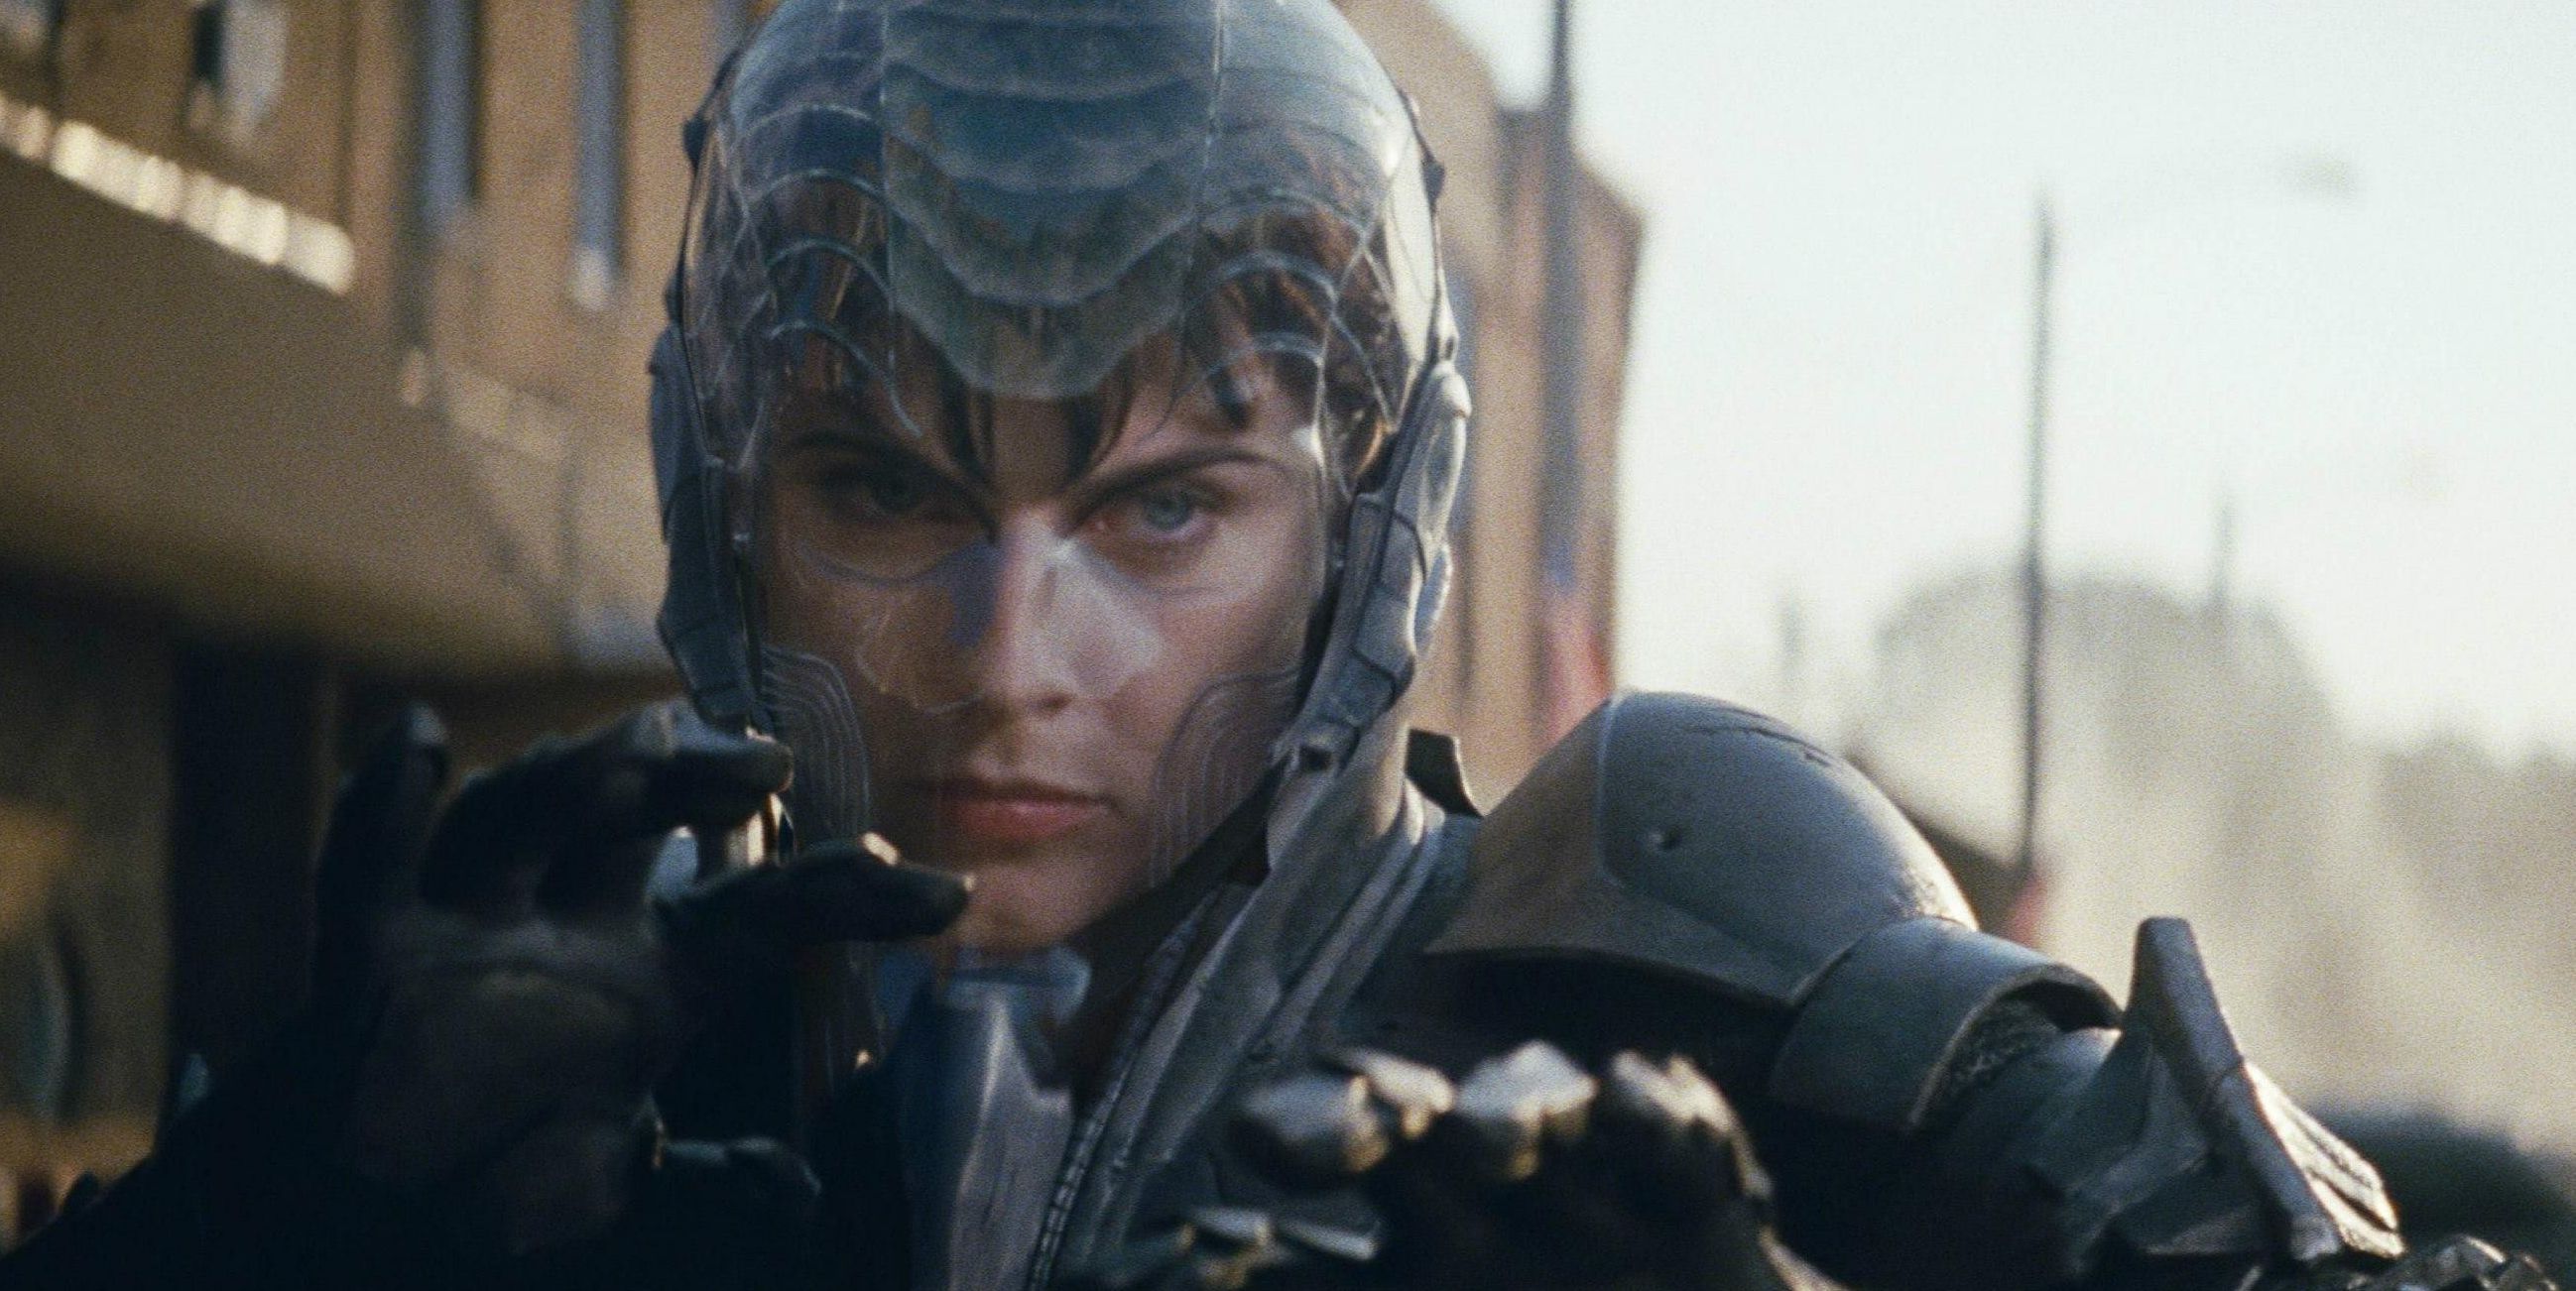 The role of Faora may have gone to Gal Gadot